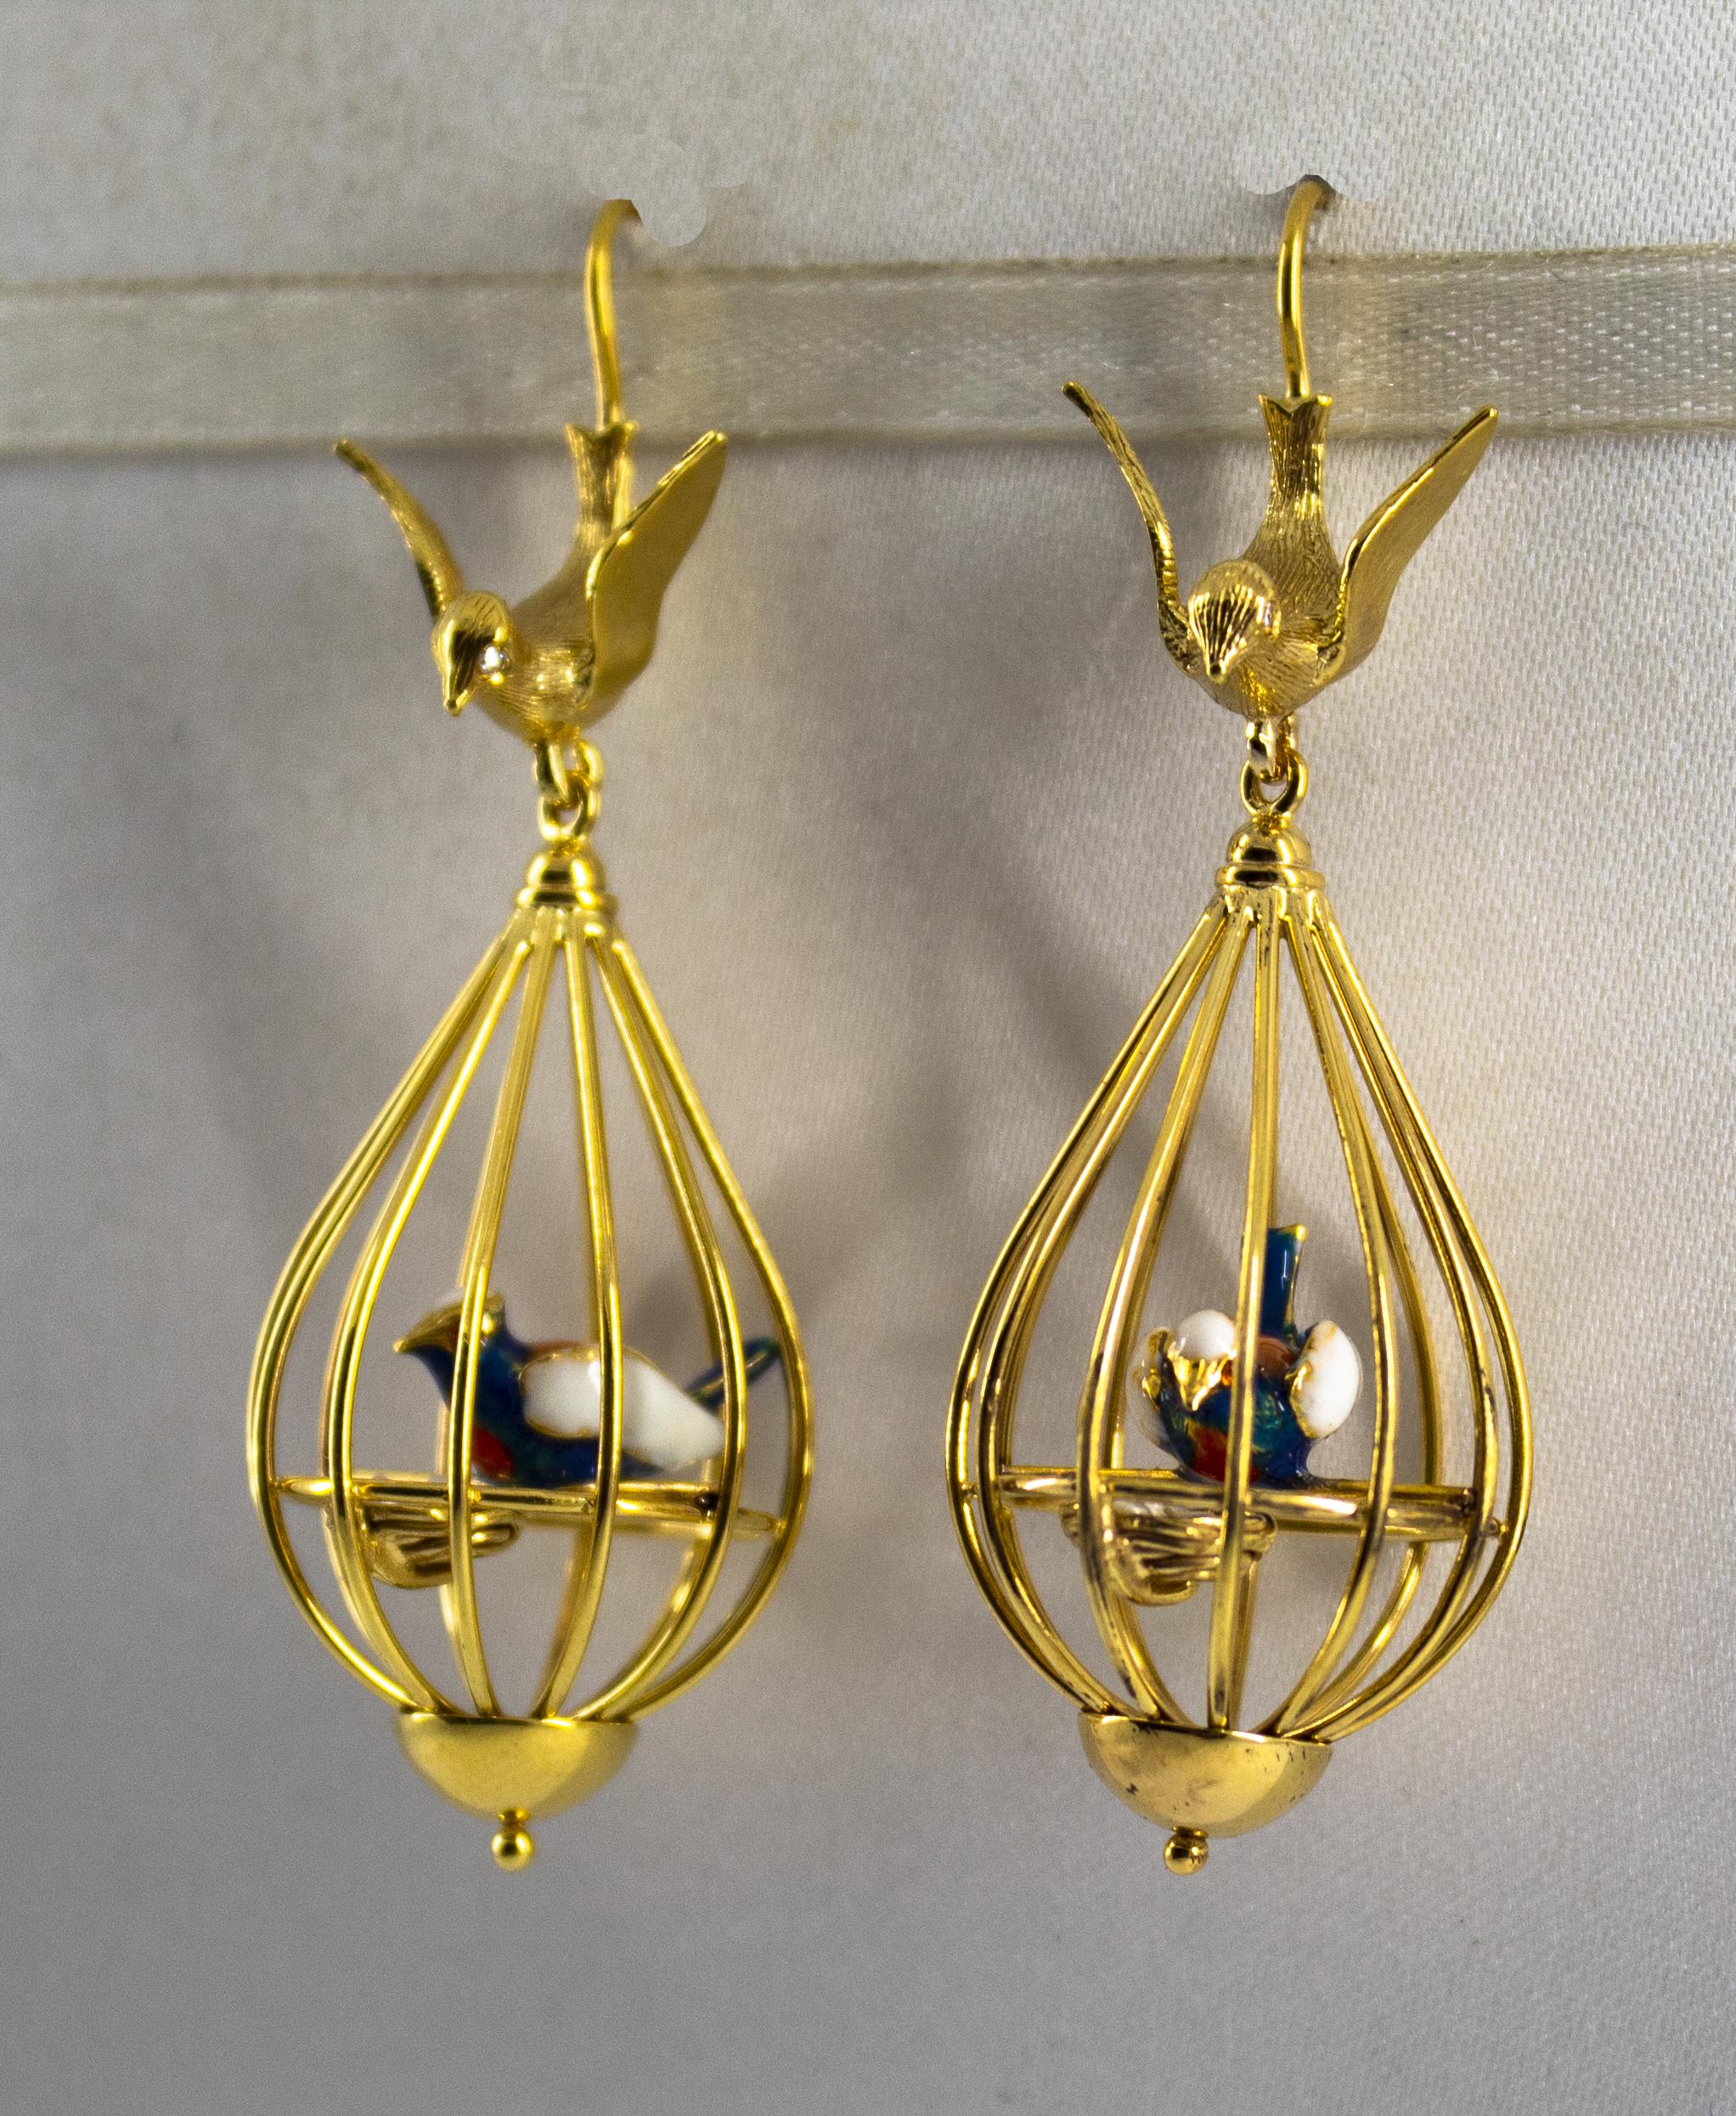 These Earrings are made of 9K Yellow Gold.
These Earrings have 0.02 Carats of White Diamonds.
These Earrings have also Enamel, Coral and Pearls.
We're a workshop so every piece is handmade, customizable and resizable.